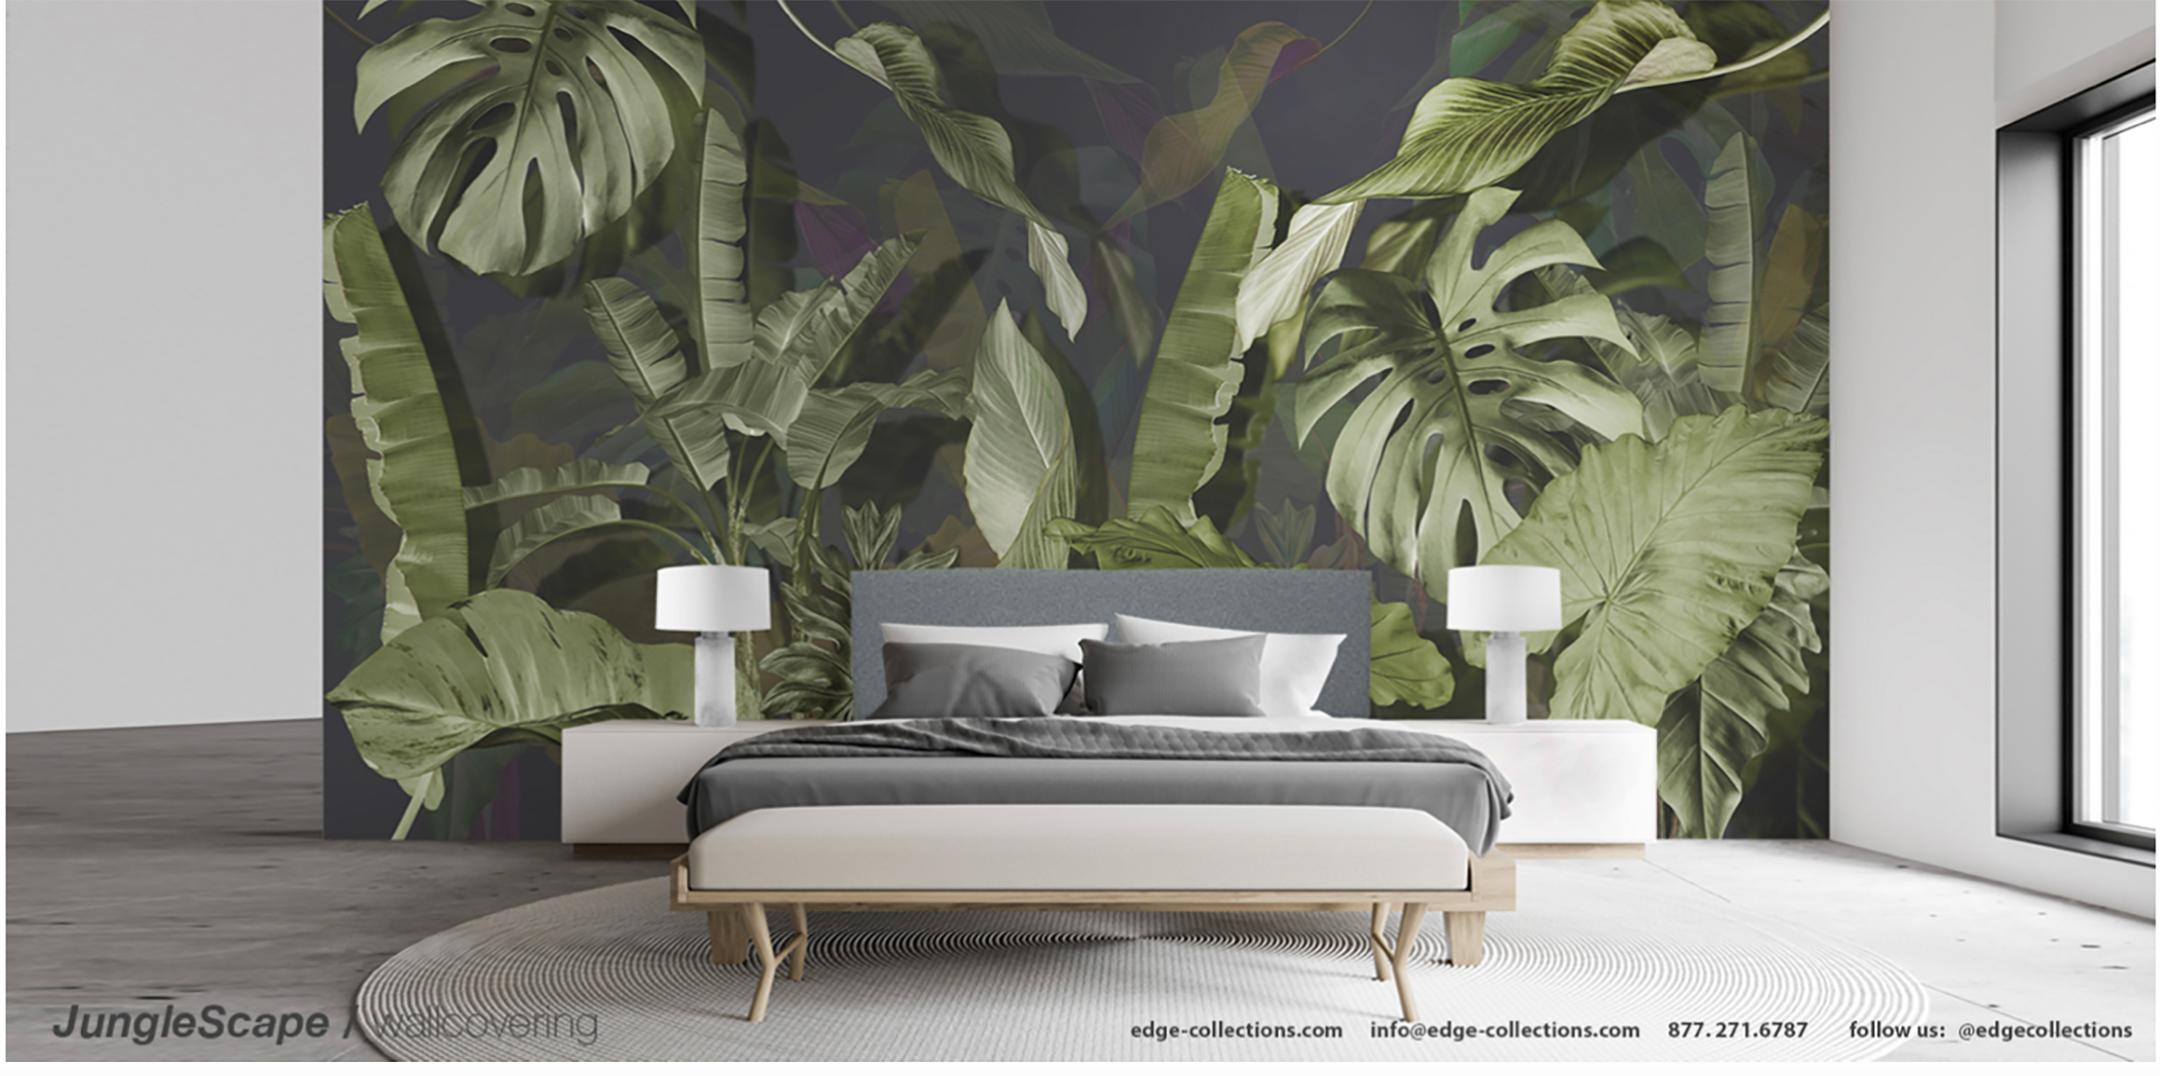 Introducing..... JungleScape by Edge Collections. 

A whimsical nod to endless Summers and the foliage of our chosen Miami home. JungleScape pays homage to the classic prints of yesteryear, while serving a tropical modernist flair. 

As light